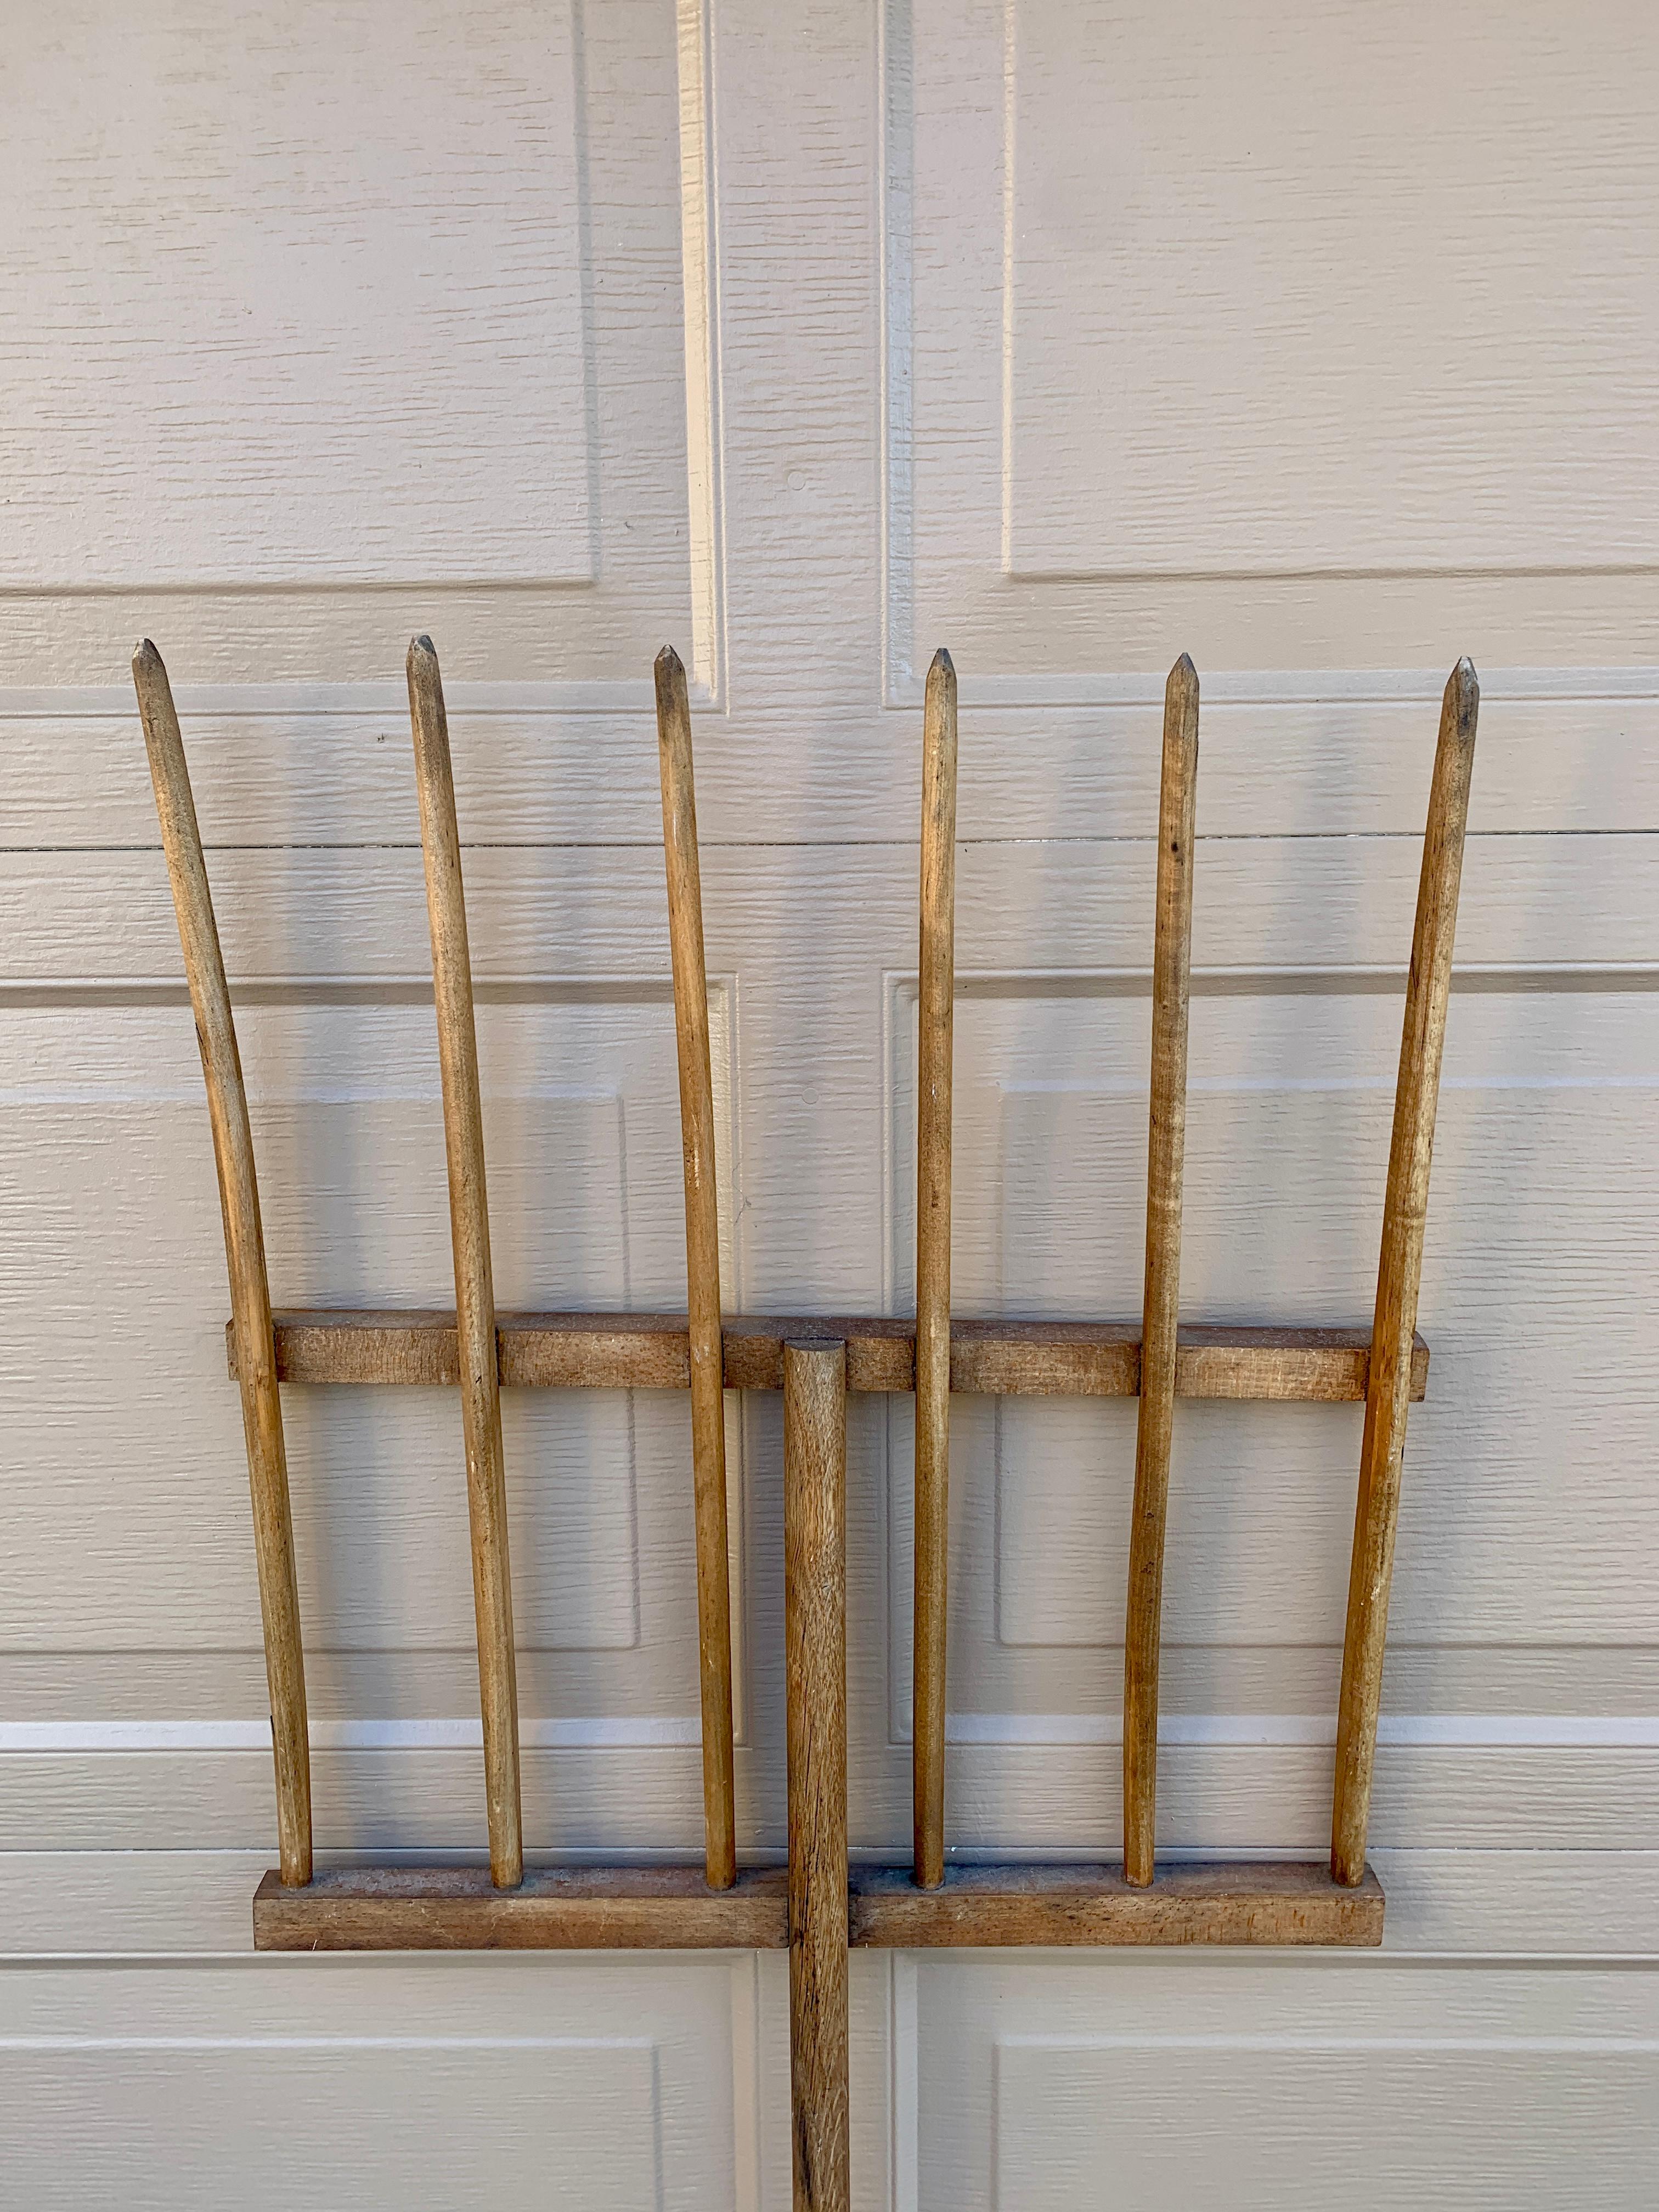 American Antique 19th Century Monumental Hand Made Wooden Pitchfork For Sale